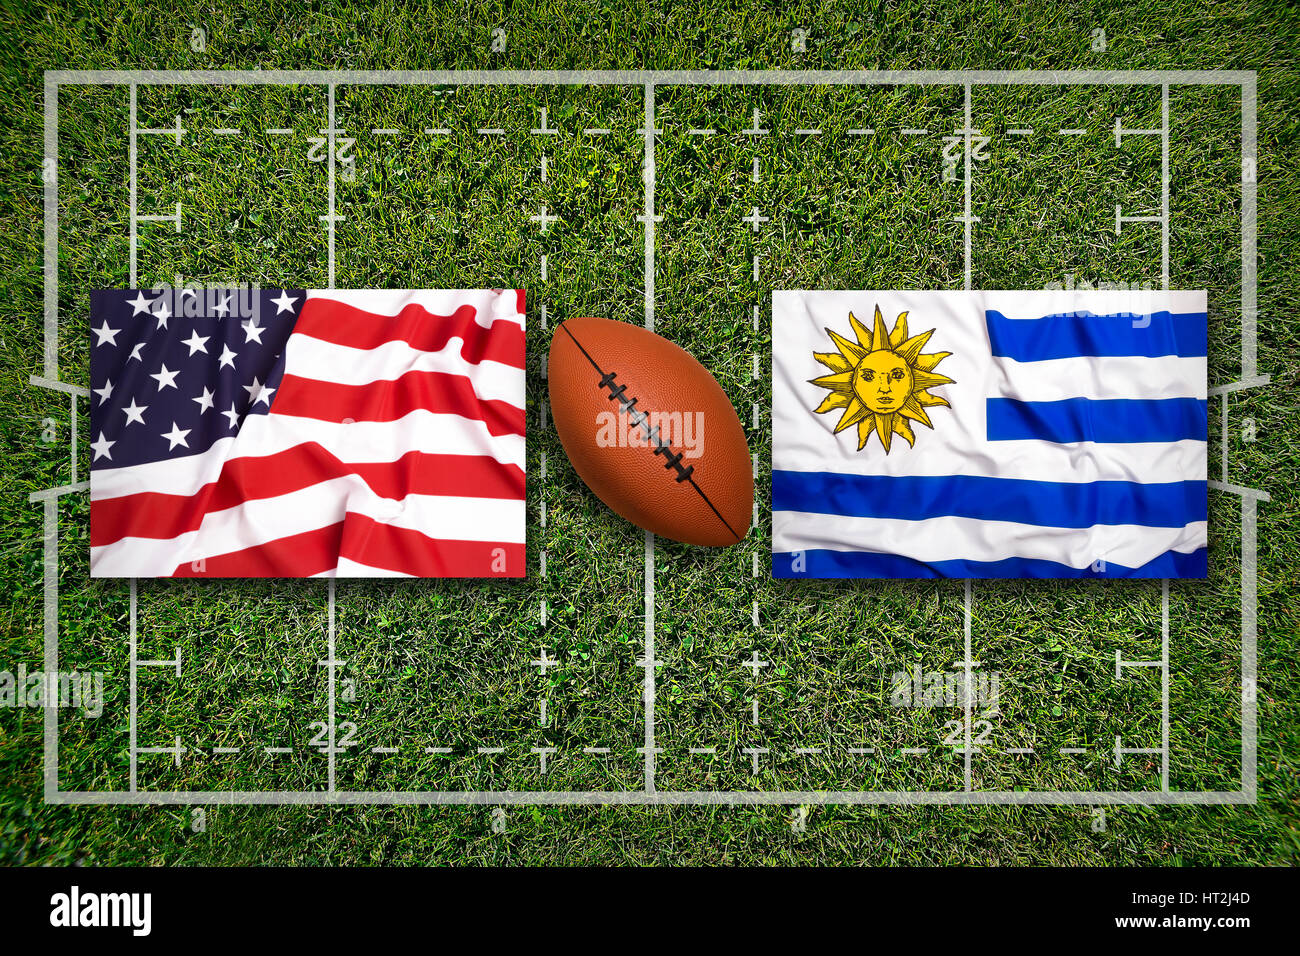 USA vs. Uruguay flags on green rugby field Stock Photo